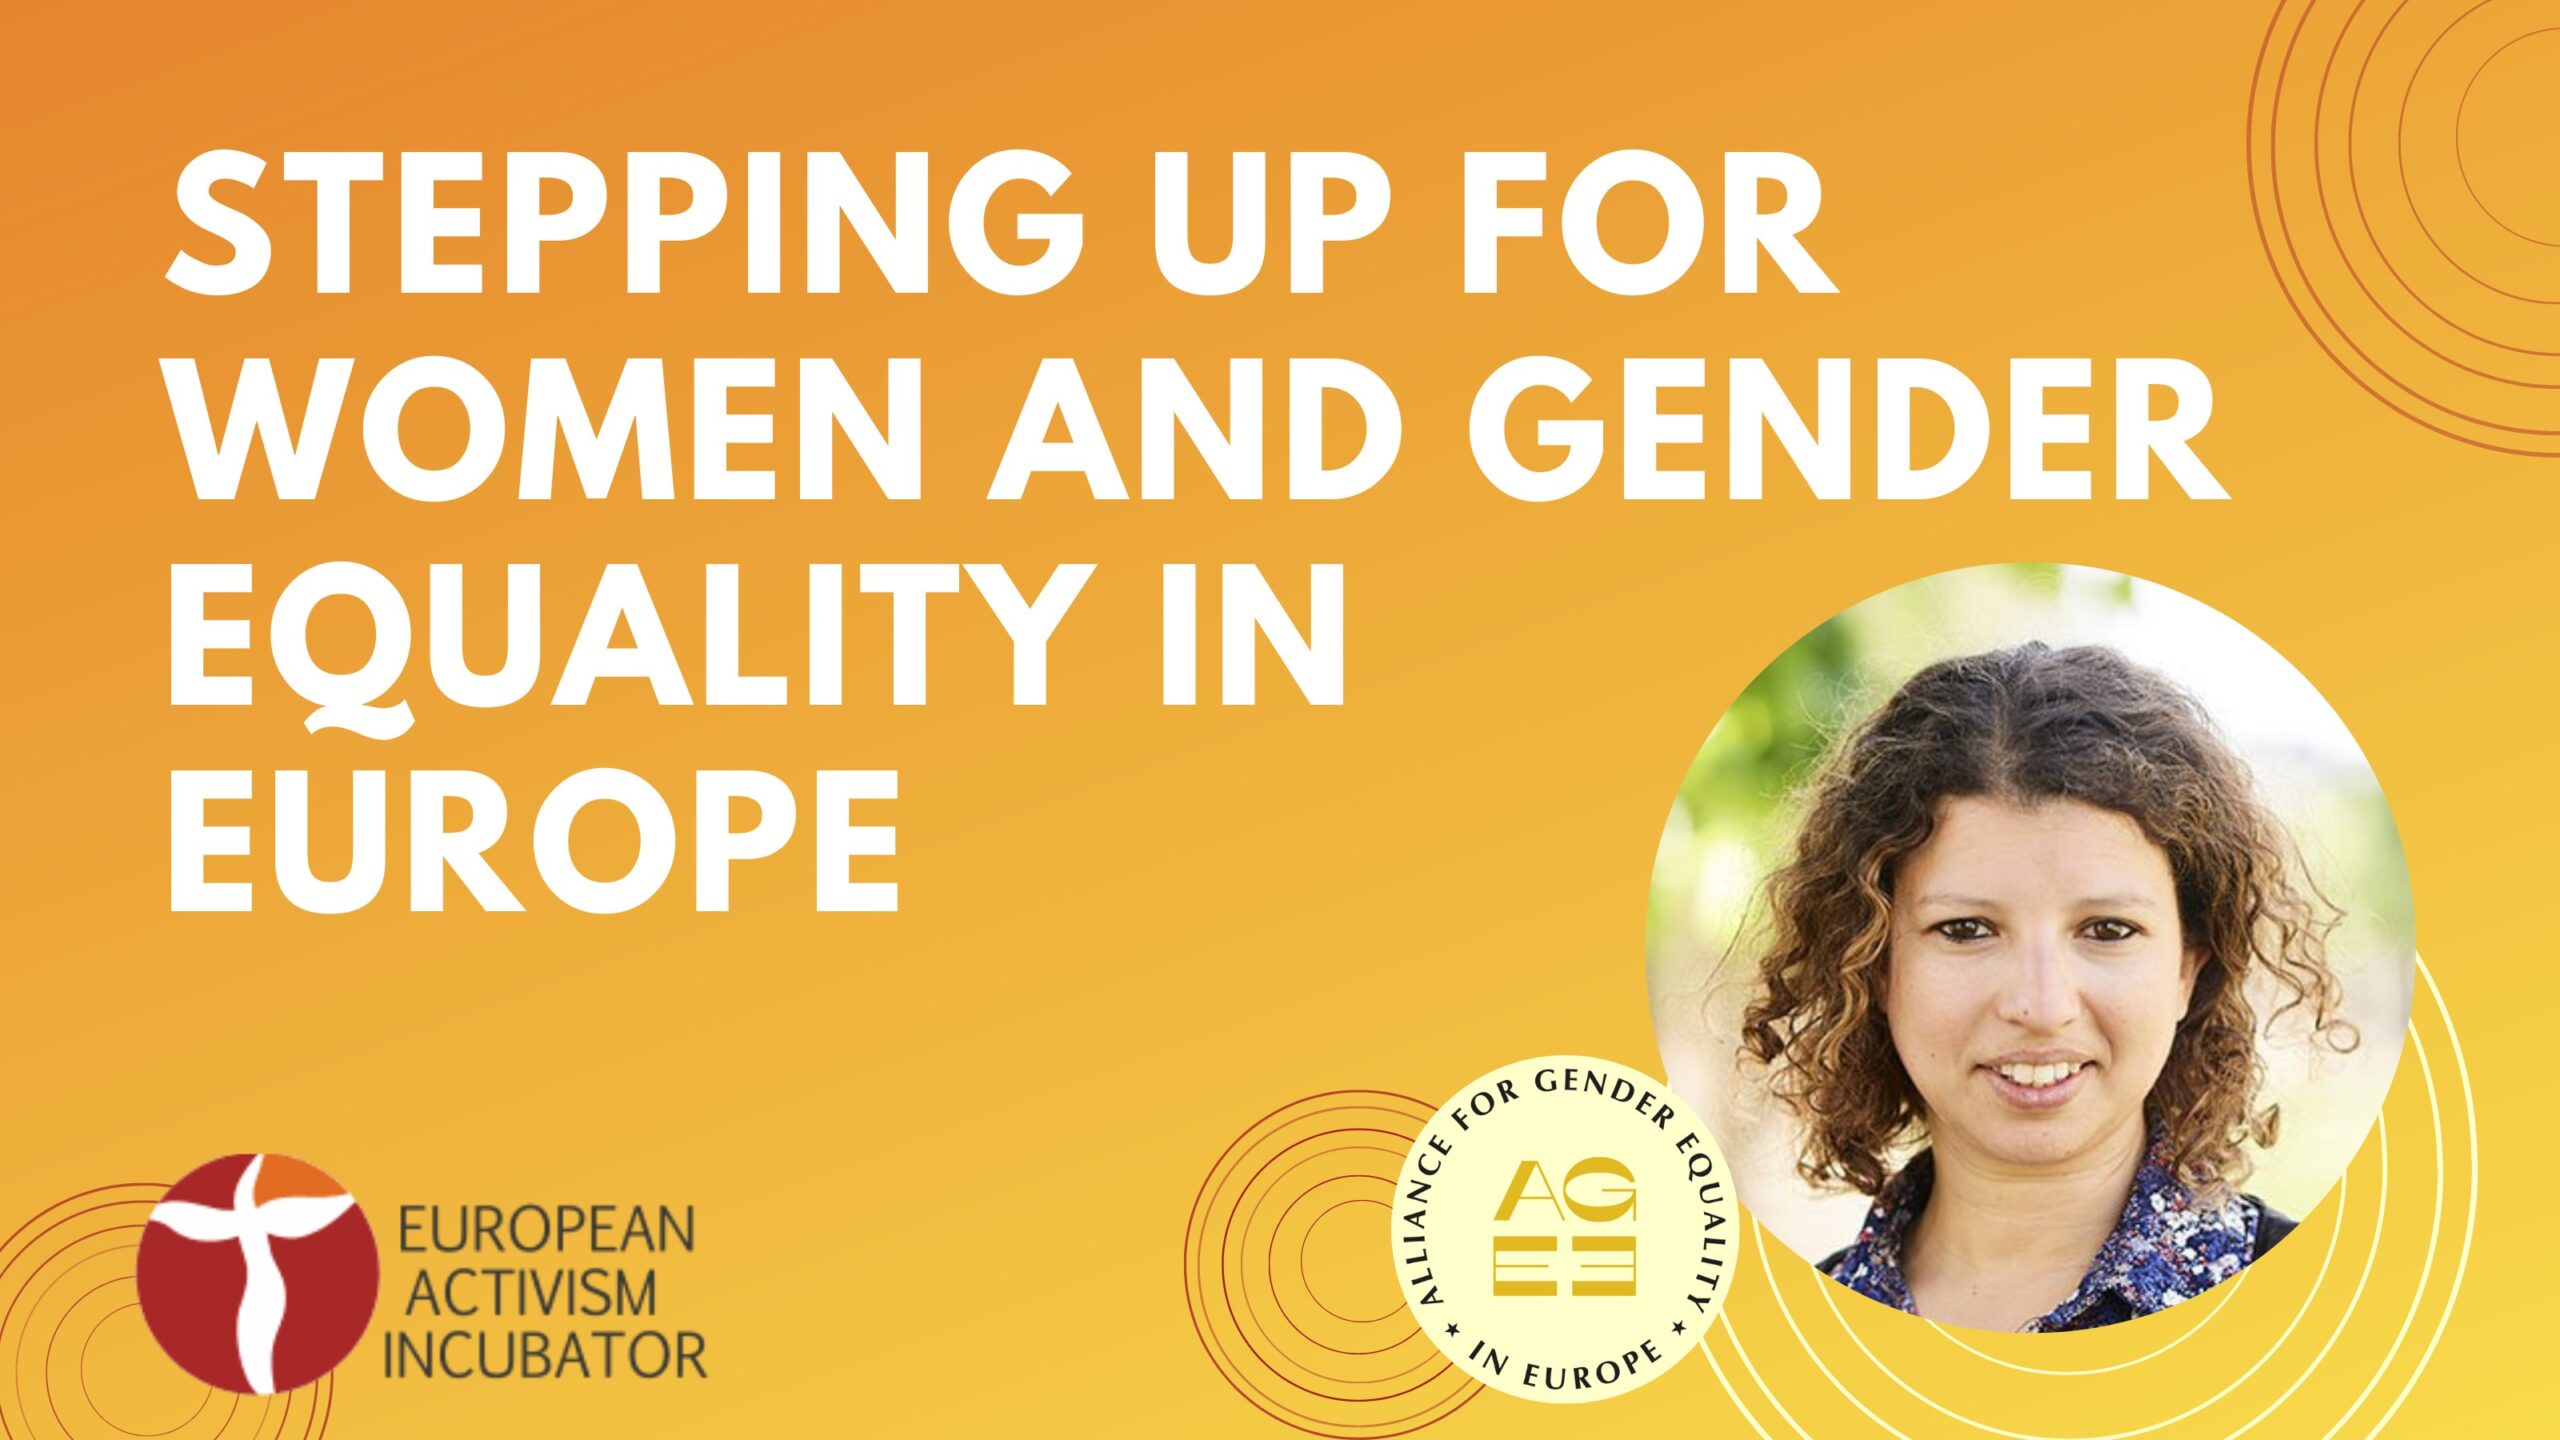 Stepping up for women and gender equality in Europe – live interview with Nadège Lharaig from the Alliance for Gender Equality in Europe